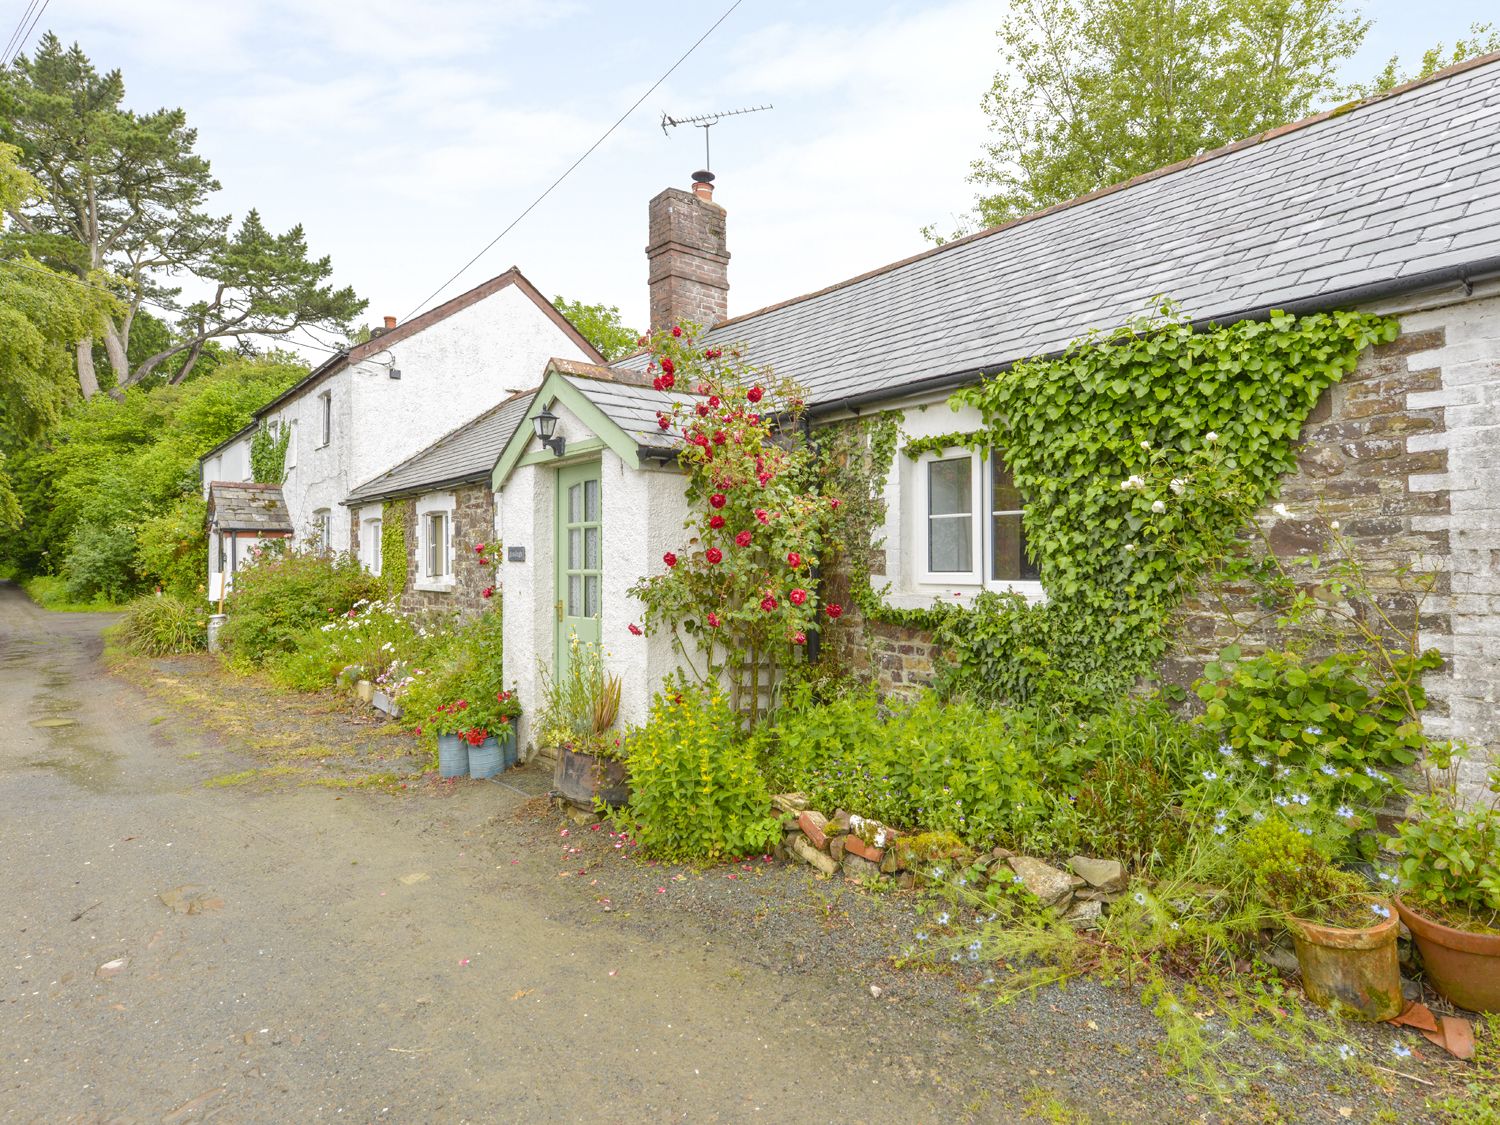 Holiday Cottages To Rent In Devon Last Minute Cottages